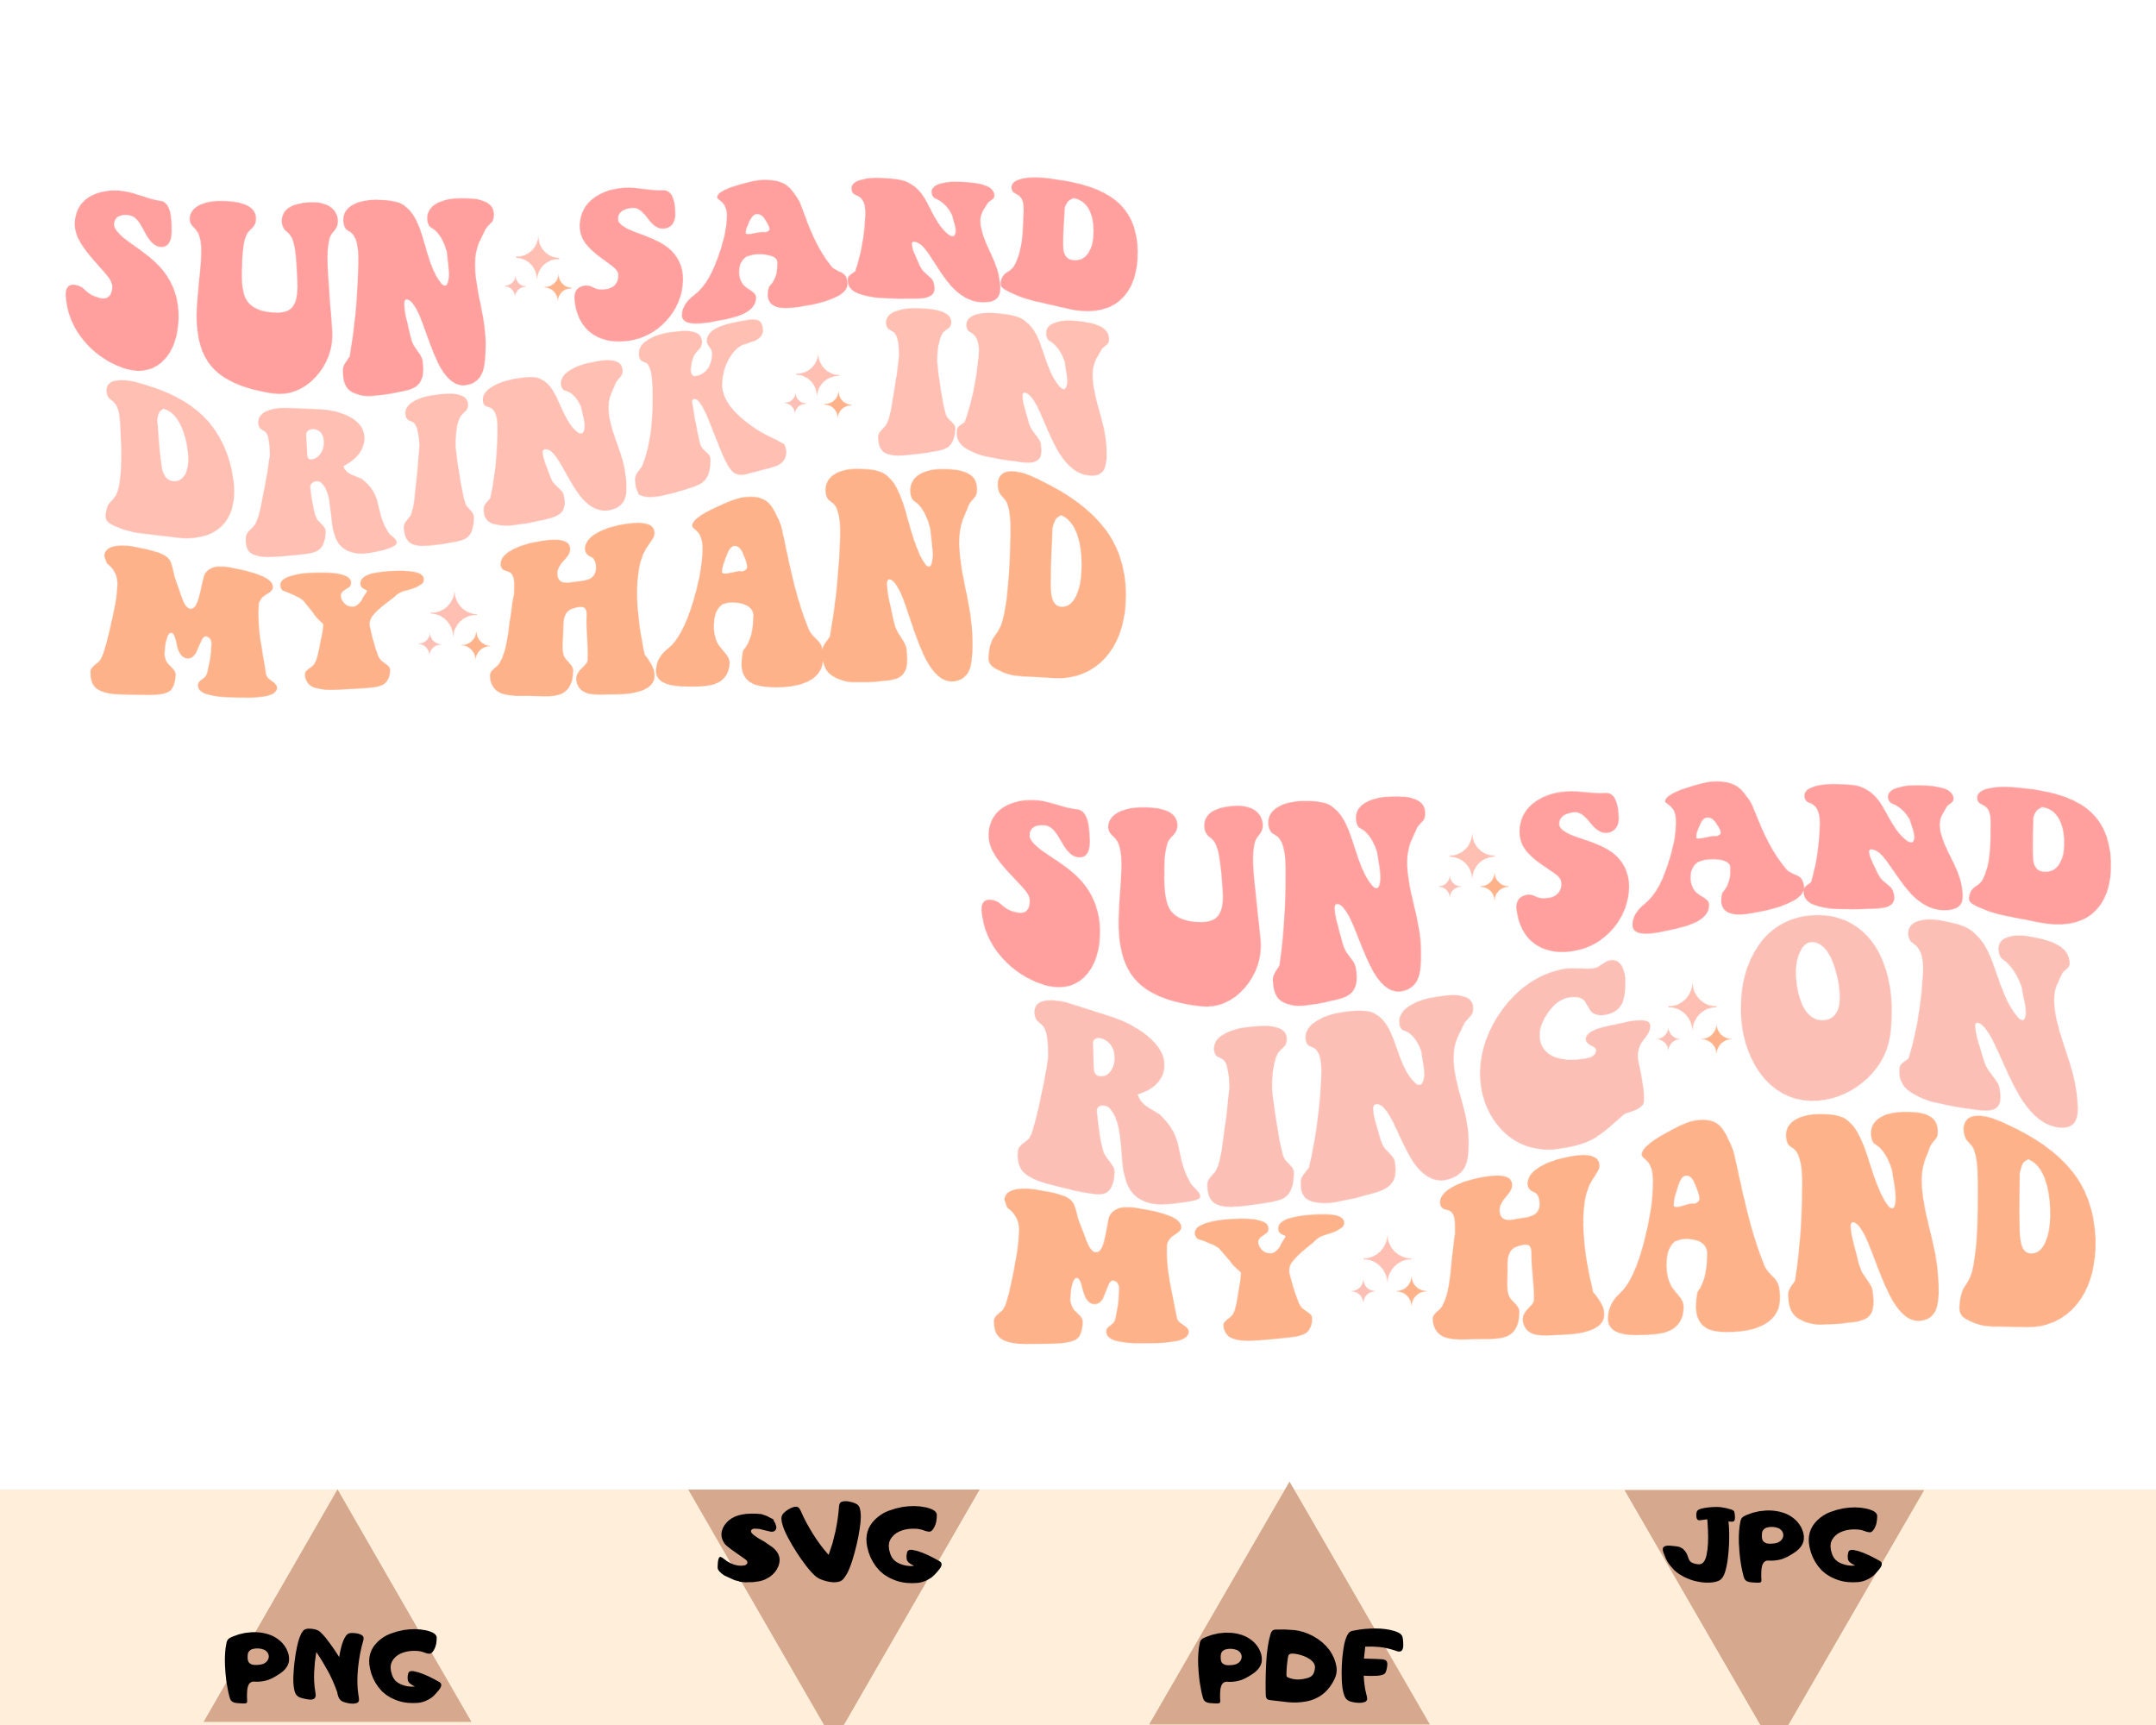 Drink in My Hand Toes in the Sand Decal Alcohol Decal Party Decal